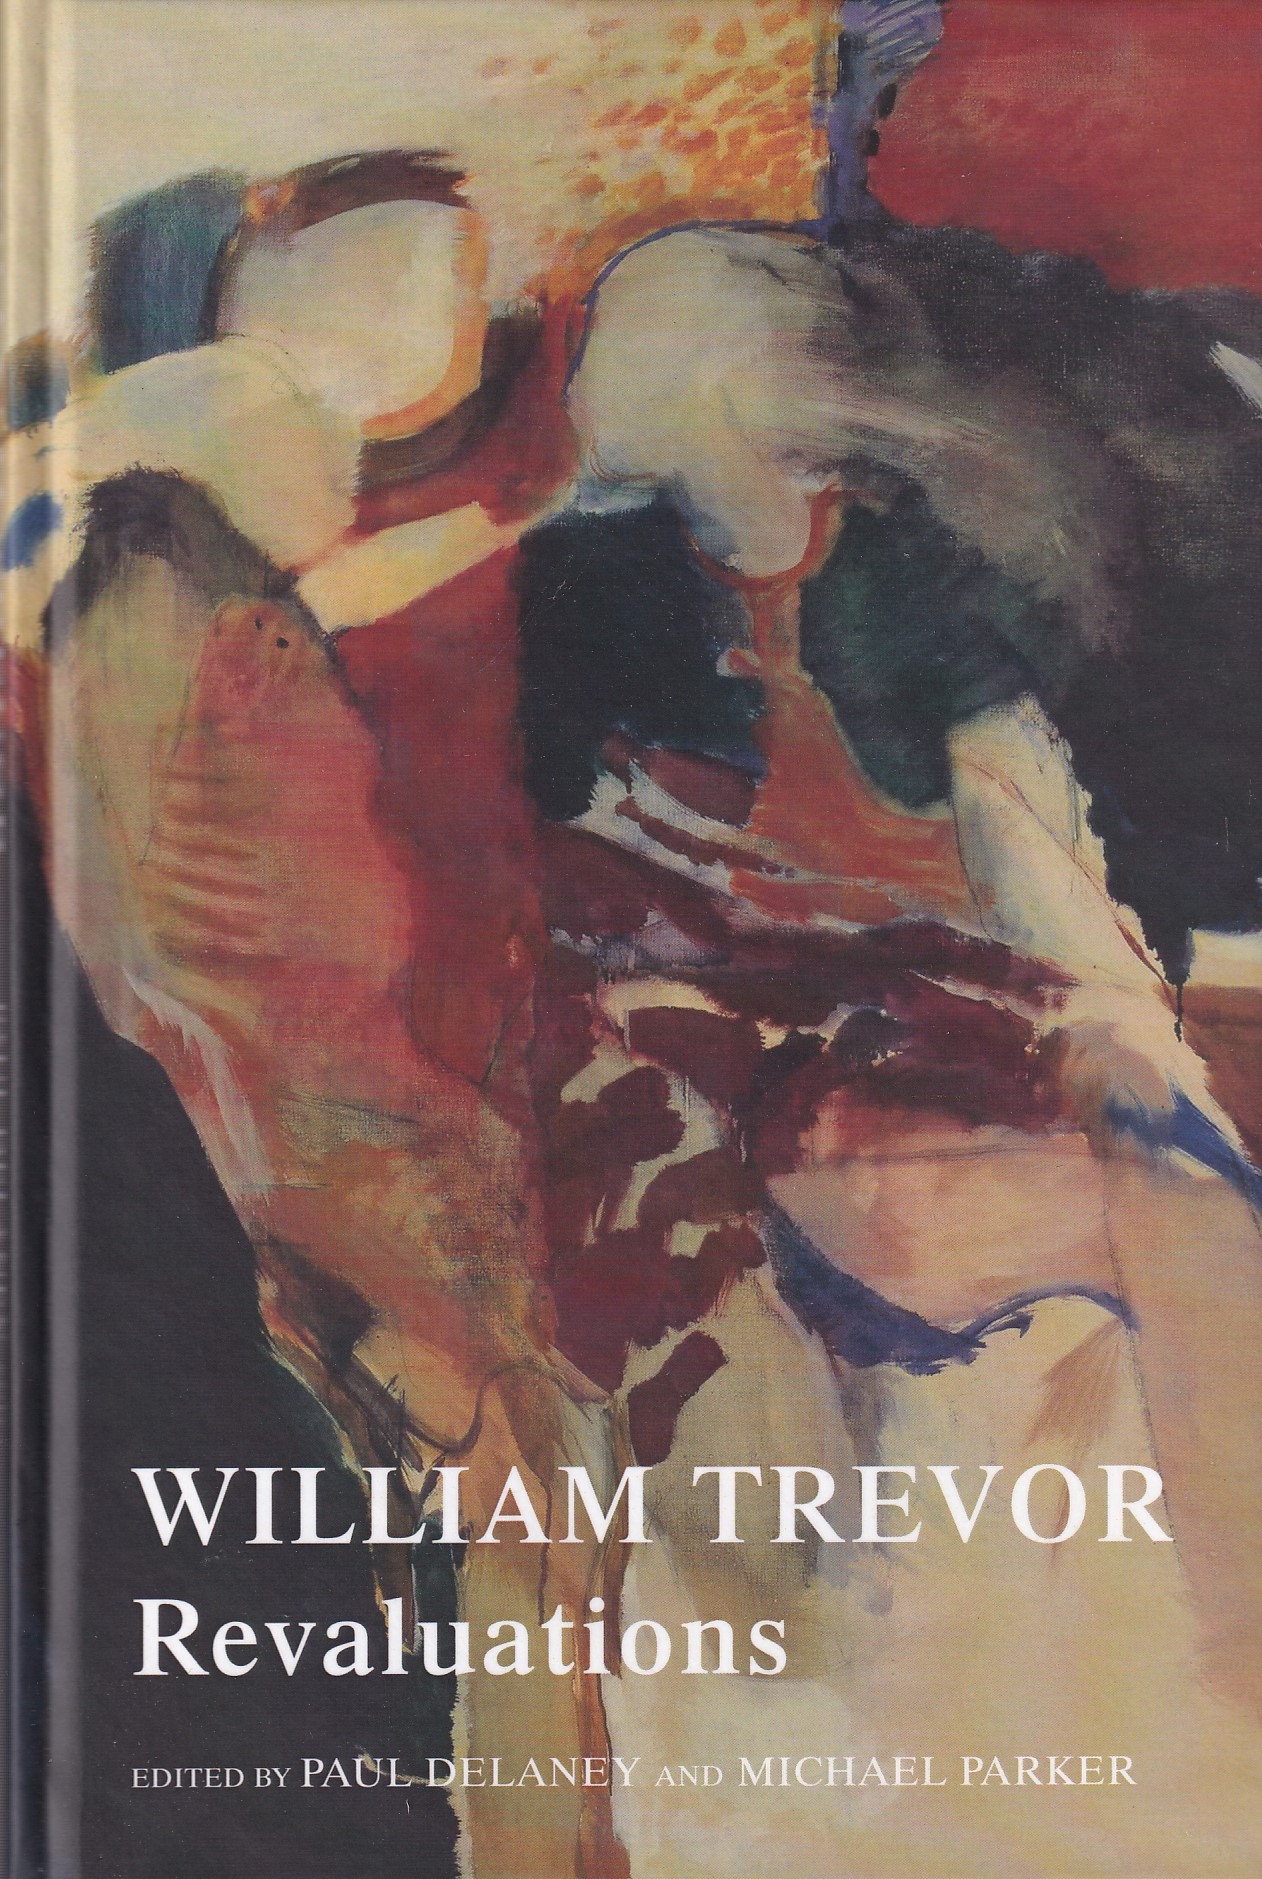 William Trevor Revaluations by Paul Delaney and Michael Parker